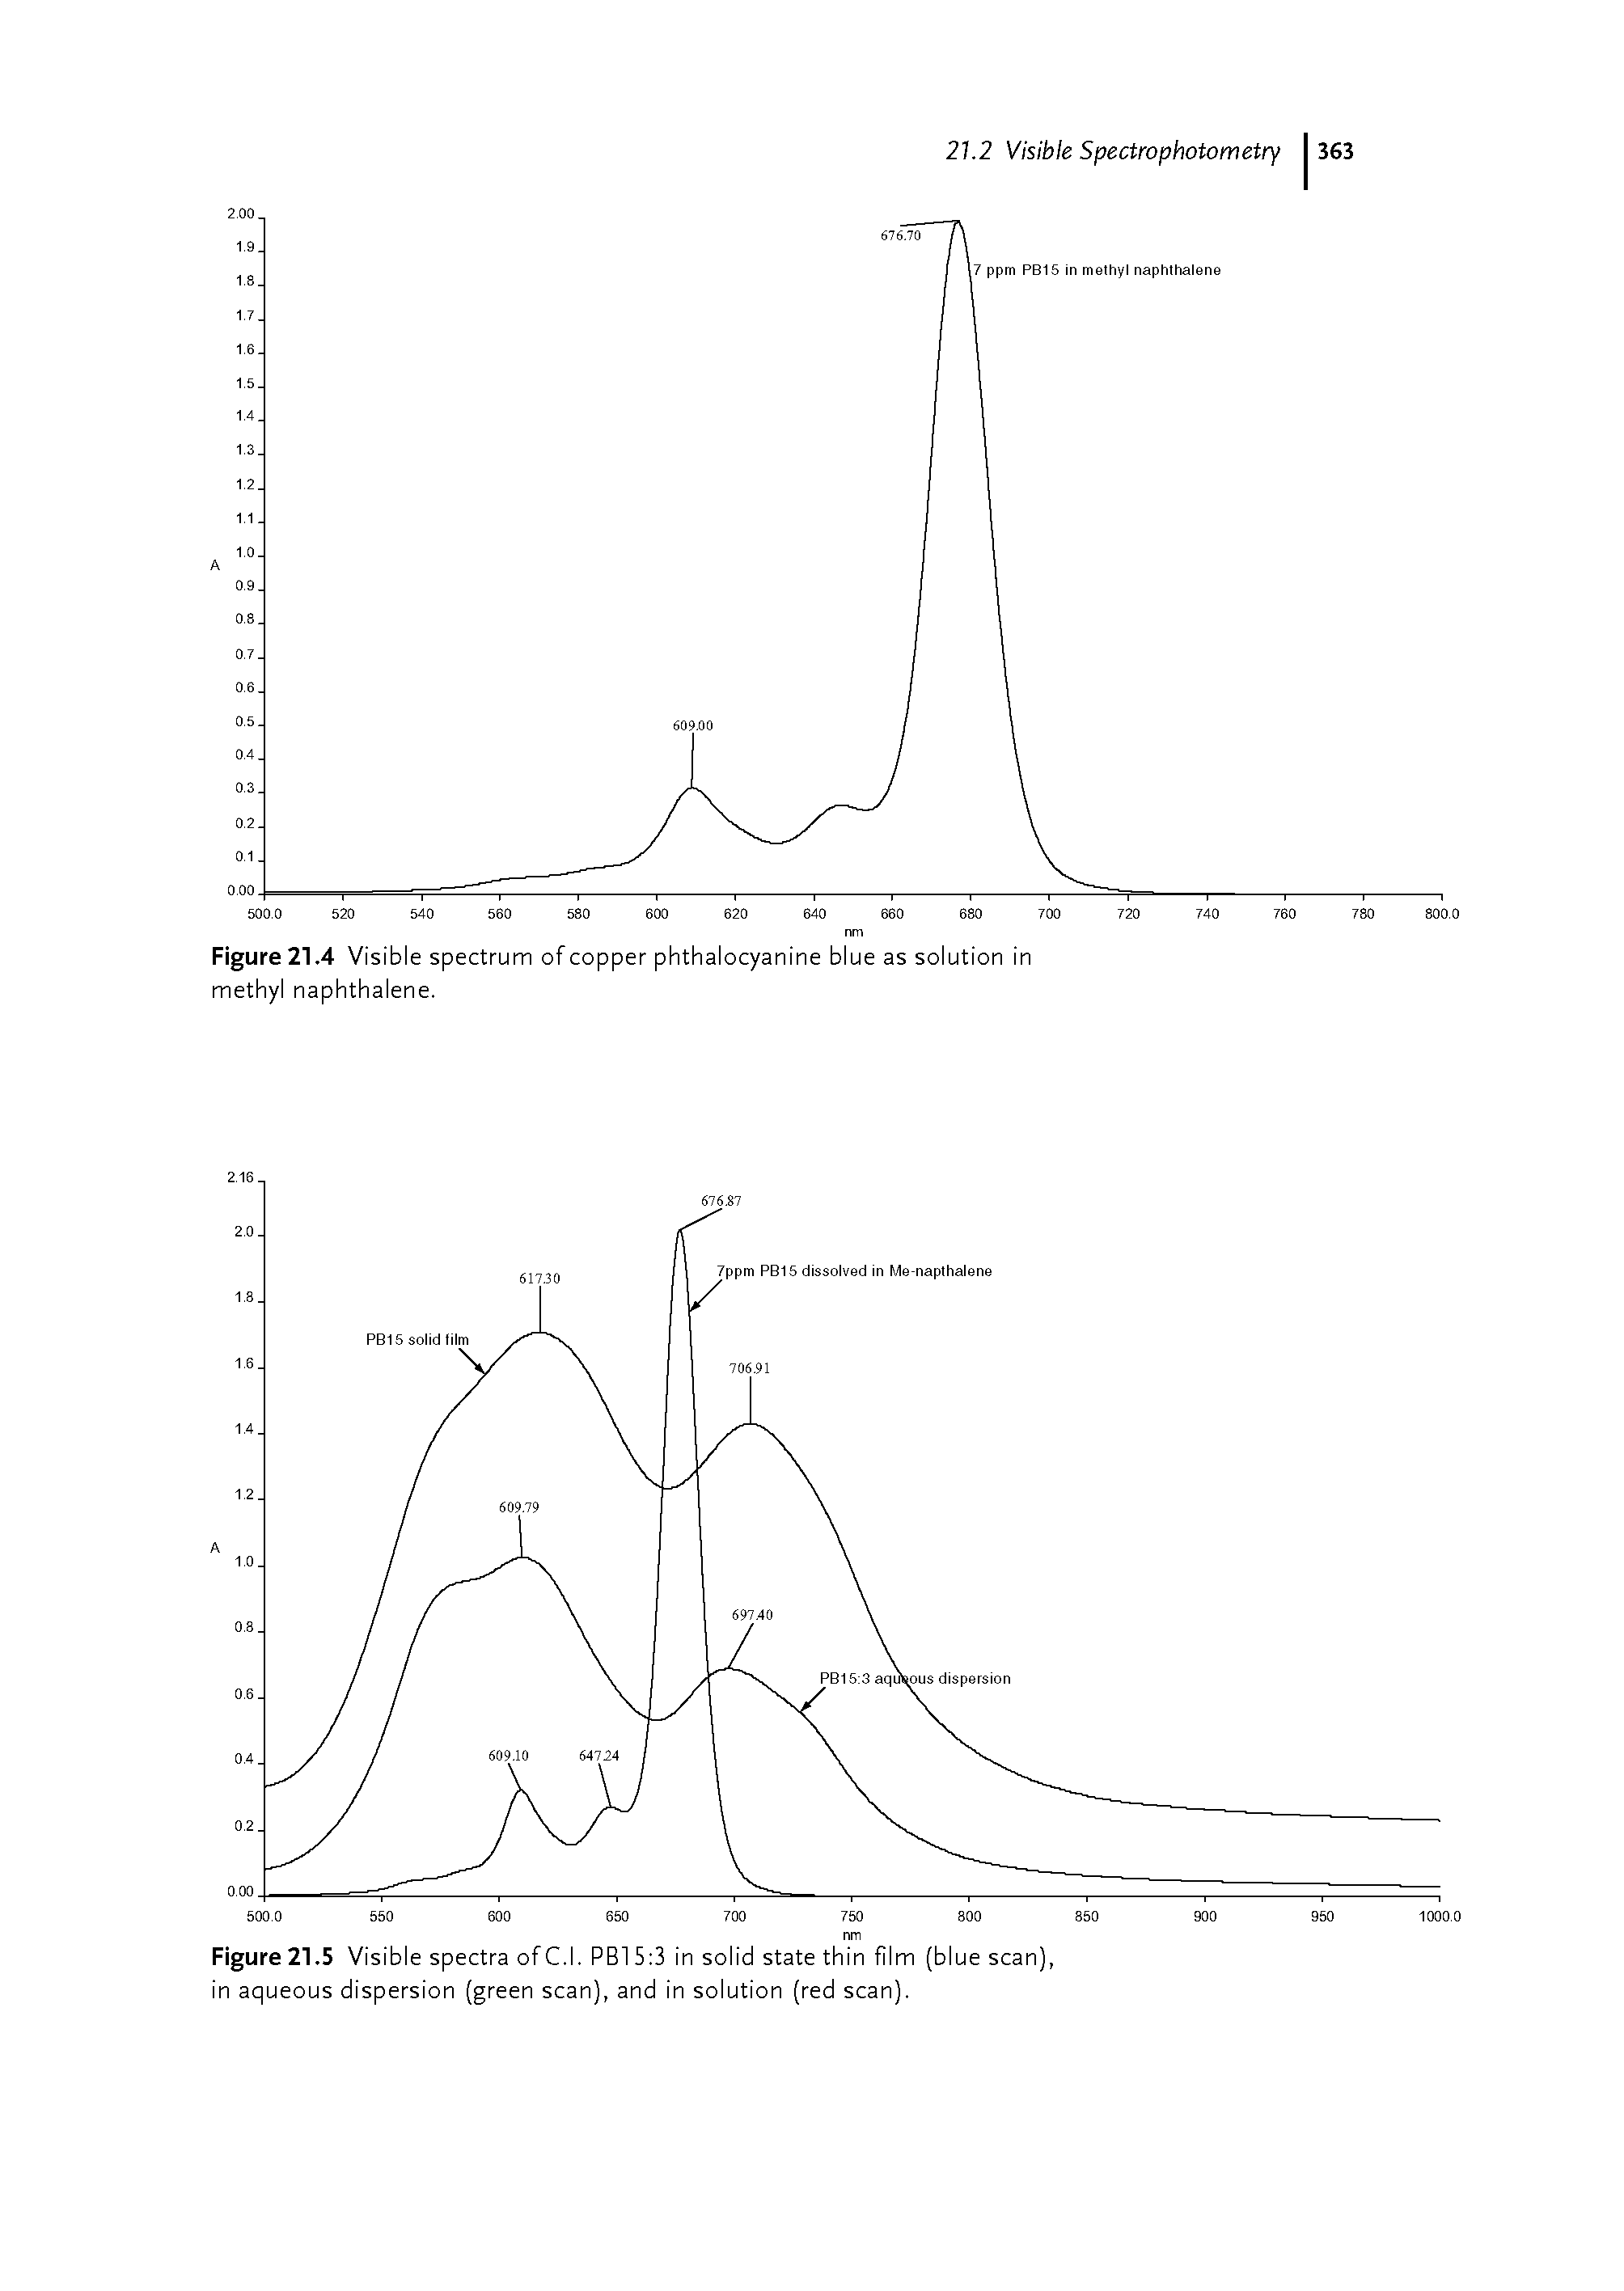 Figure 21.4 Visible spectrum of copper phthalocyanine blue as solution in methyl naphthalene.